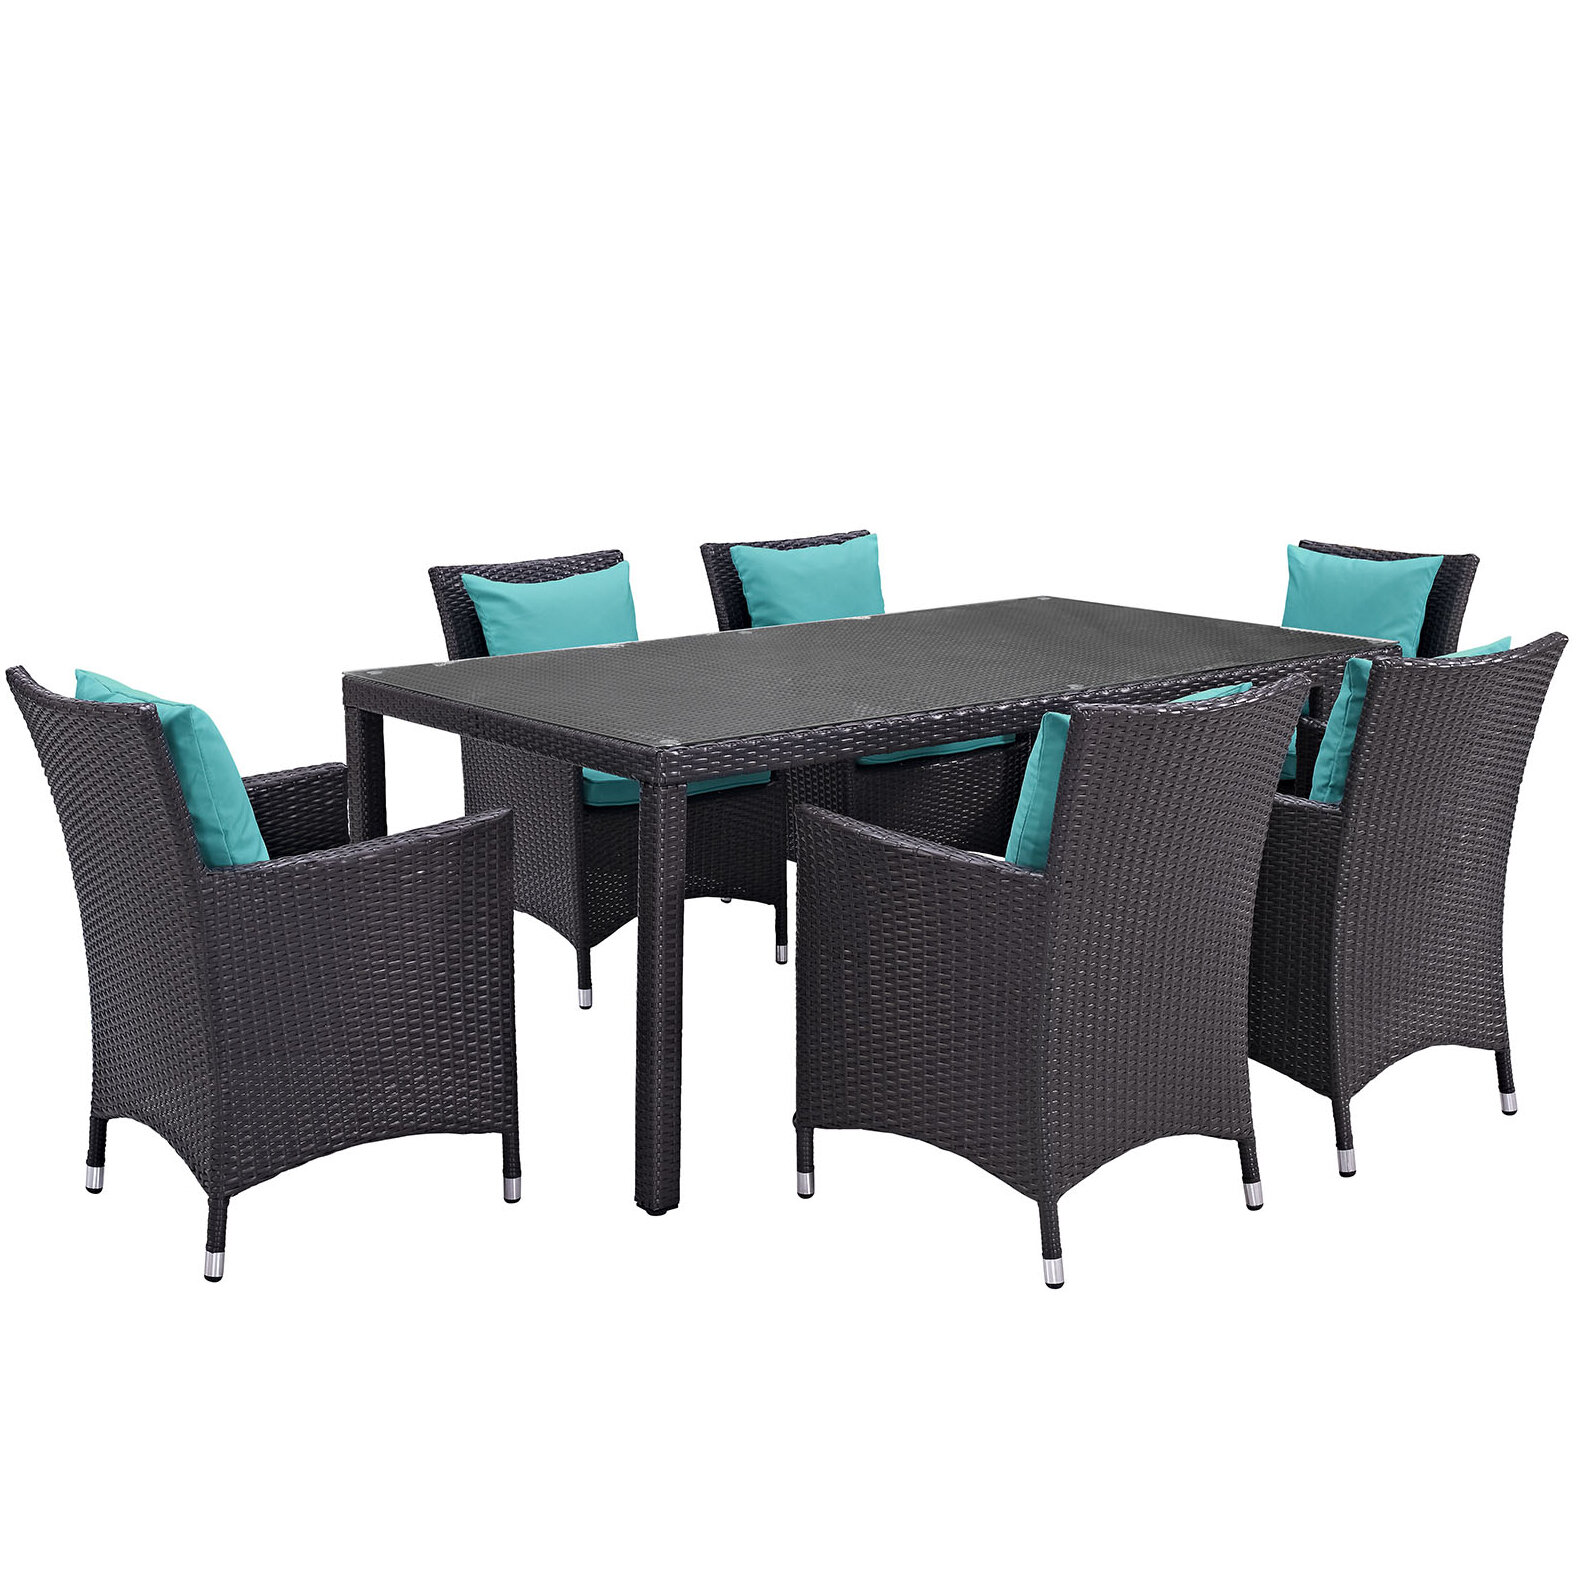 Brentwood 7 Piece Outdoor Patio Dining Set With Cushions Reviews